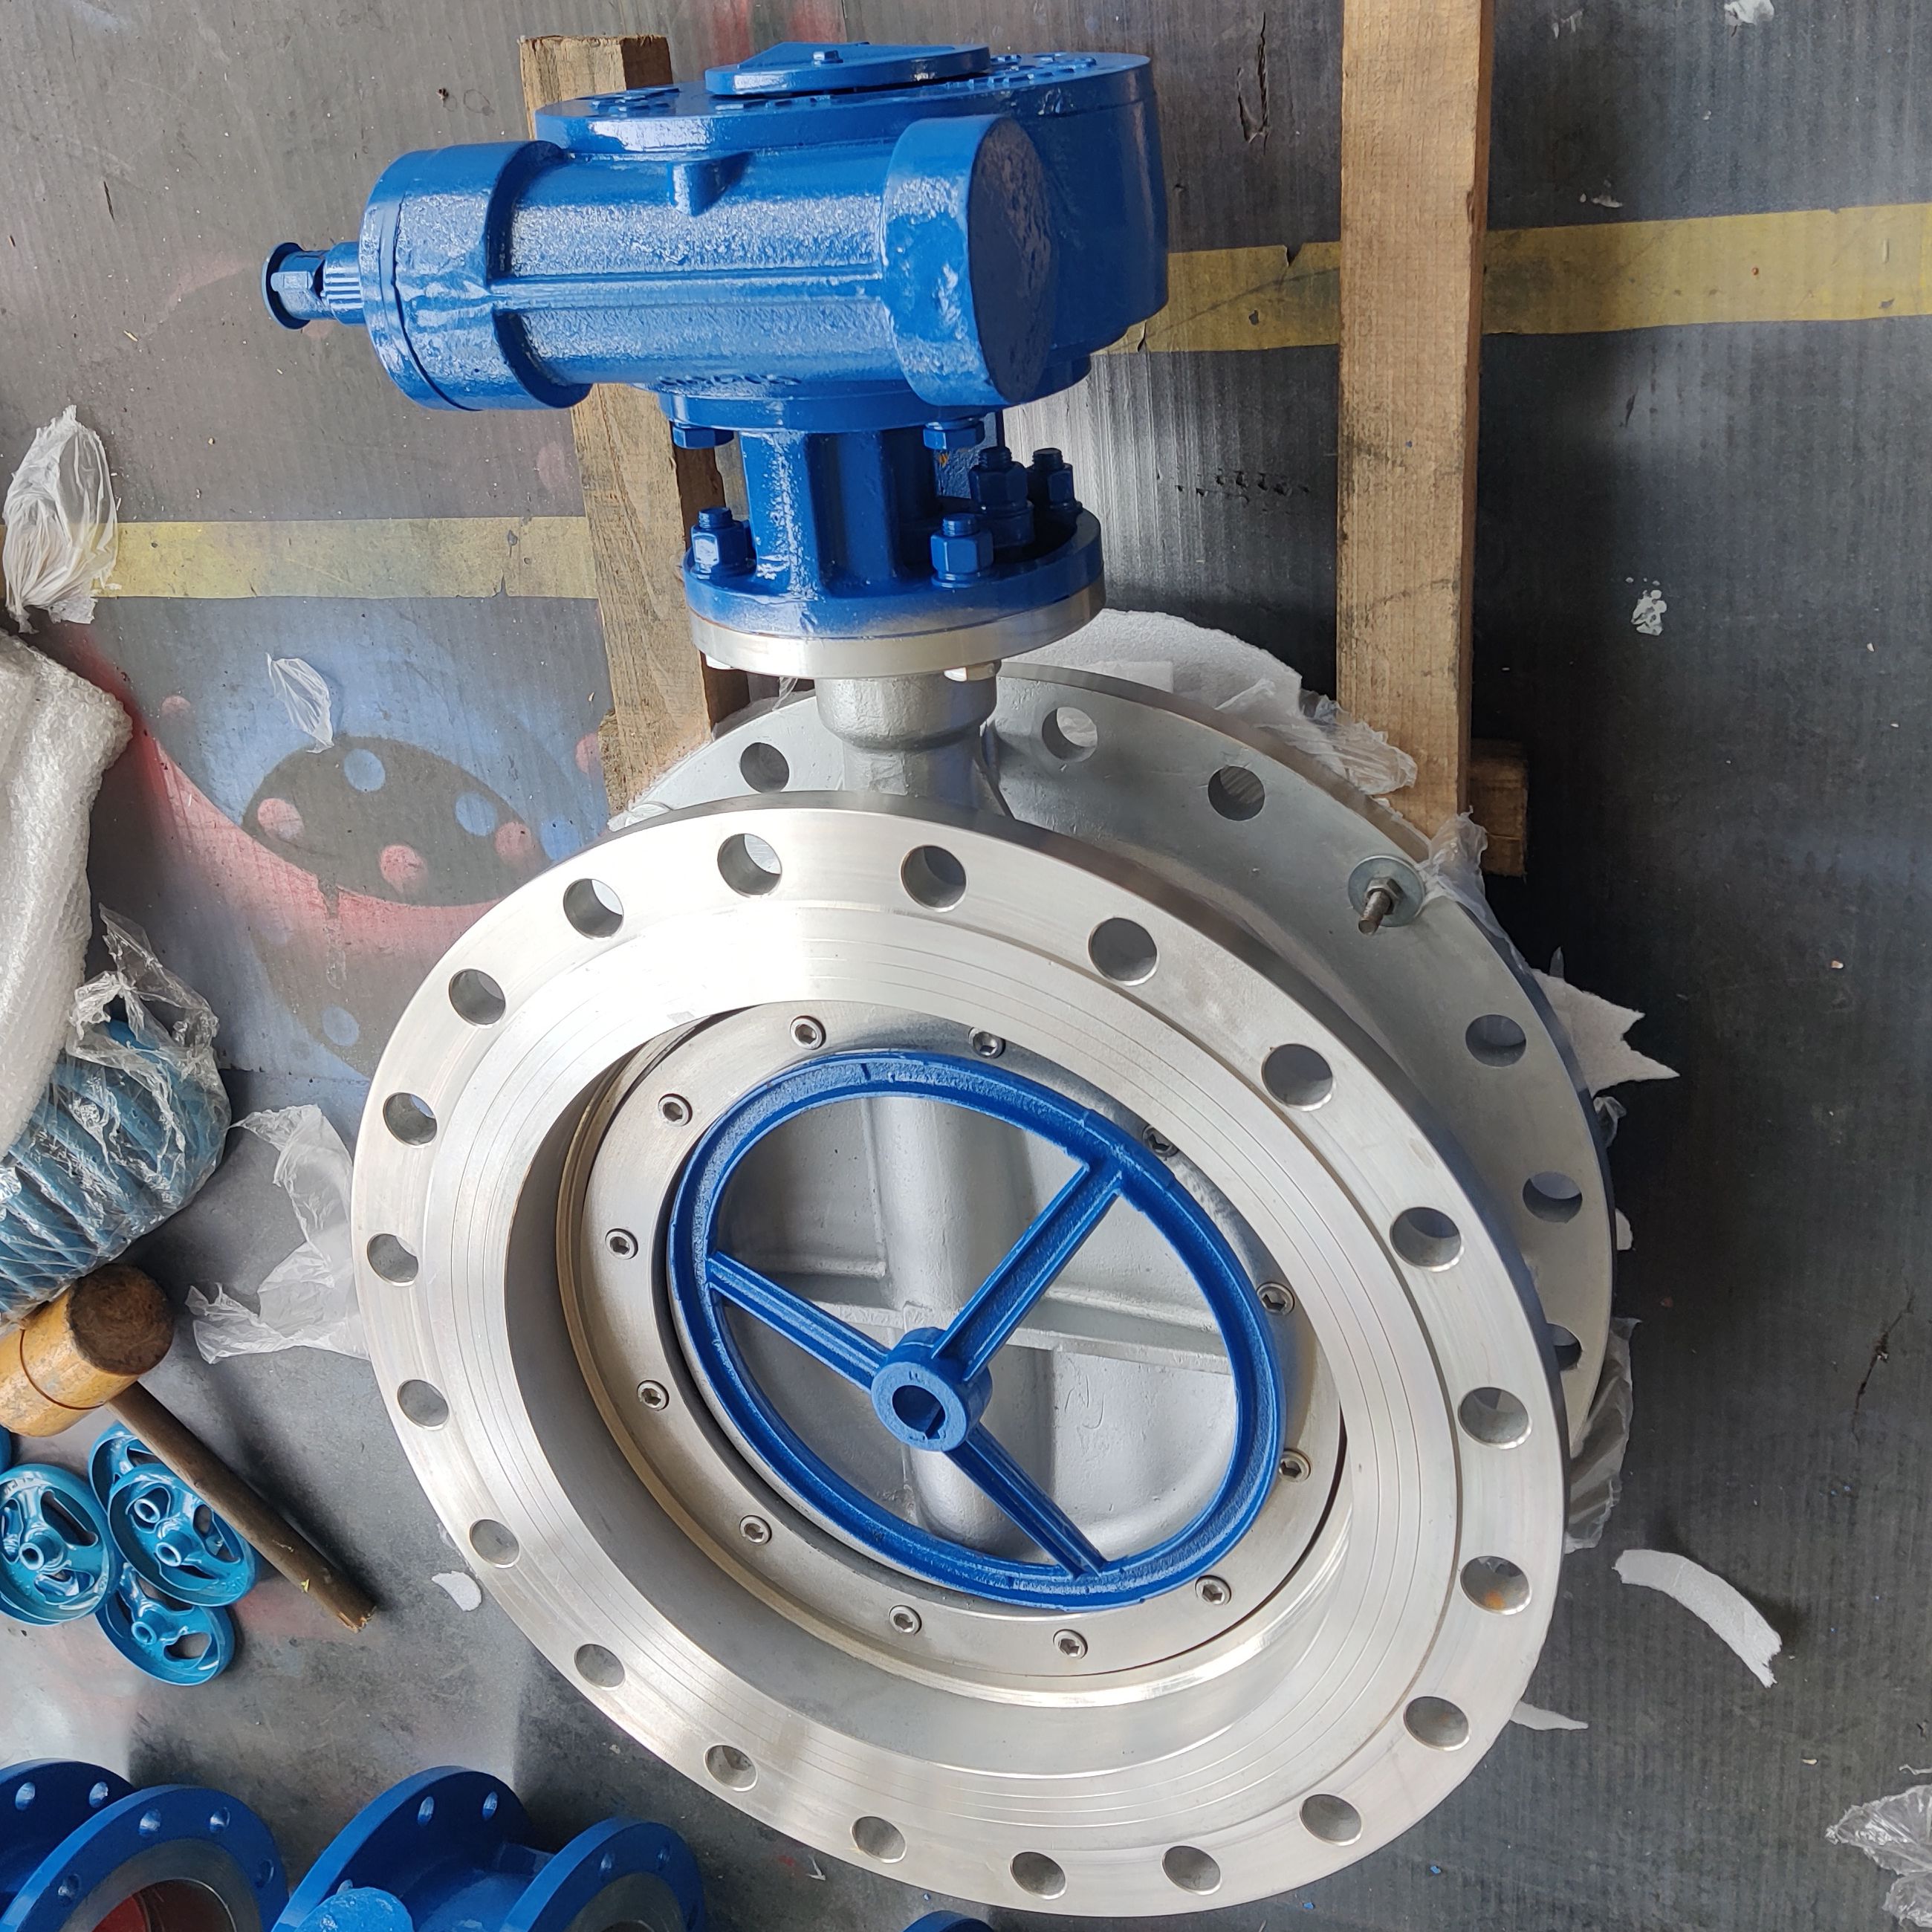 Introduction of electric actuator for valve in power station